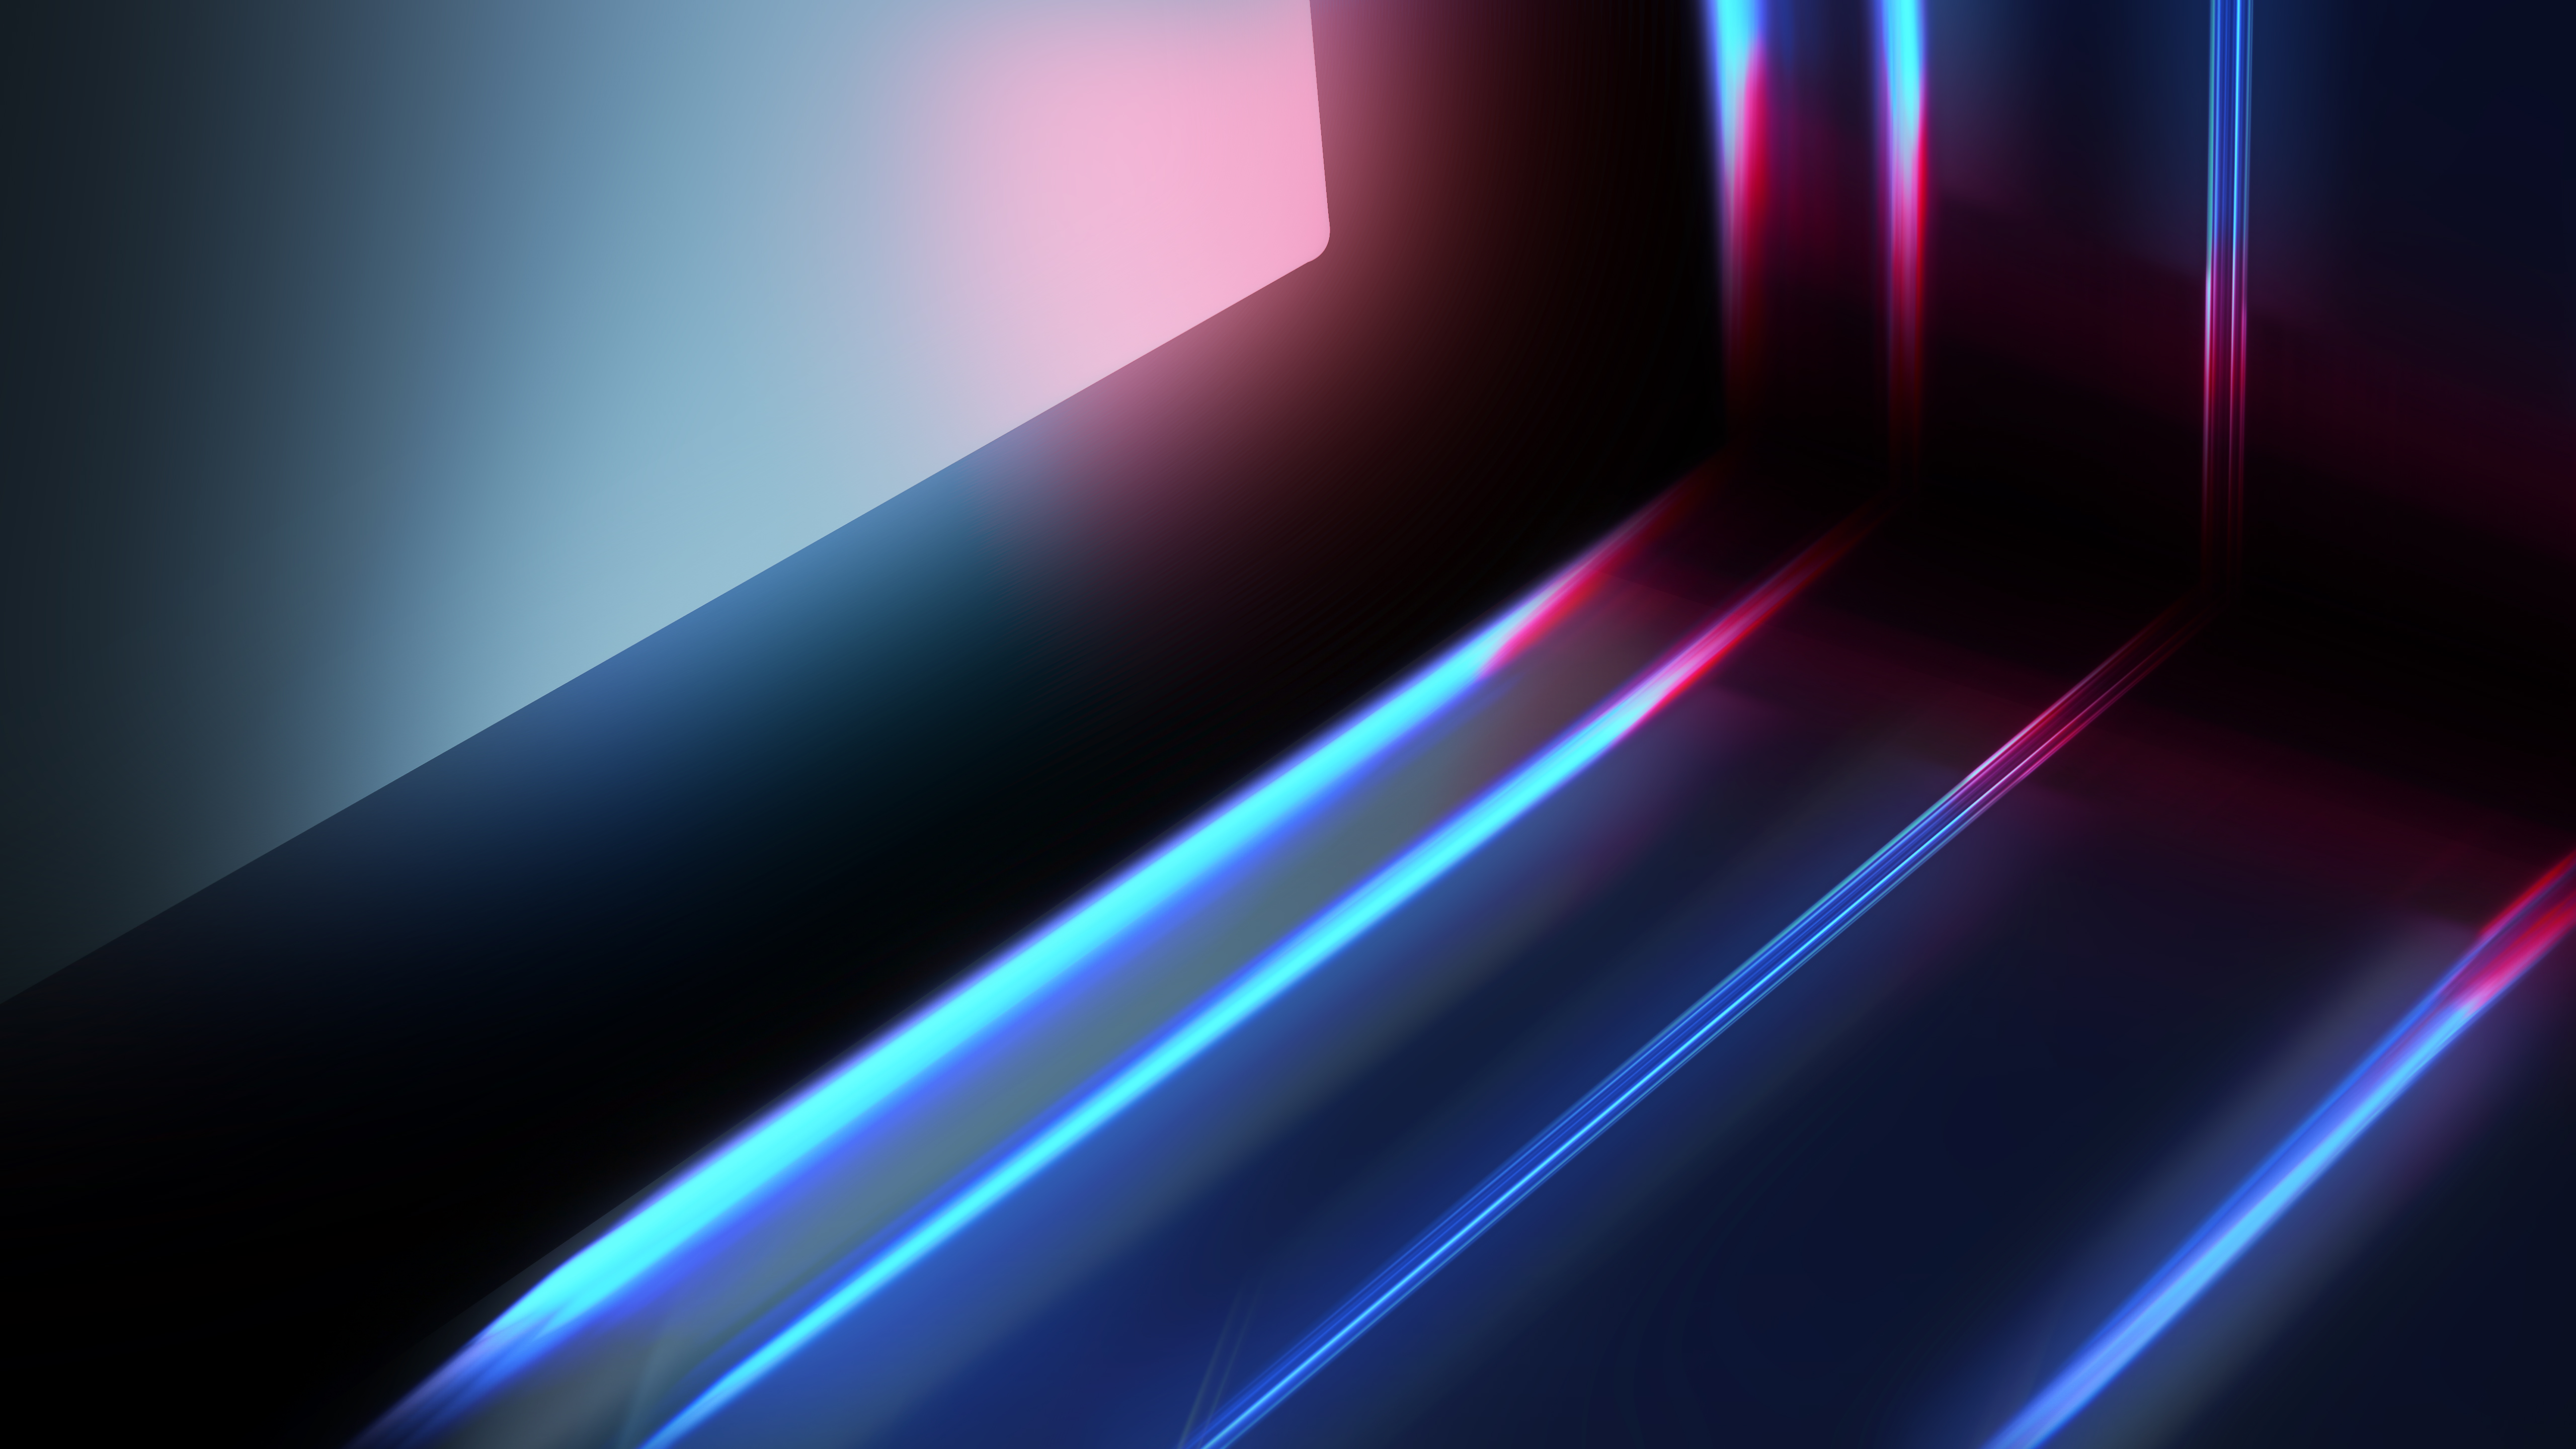 Rgb Wallpaper 4k With Wallpapers Photos And Desktop Backgrounds Up